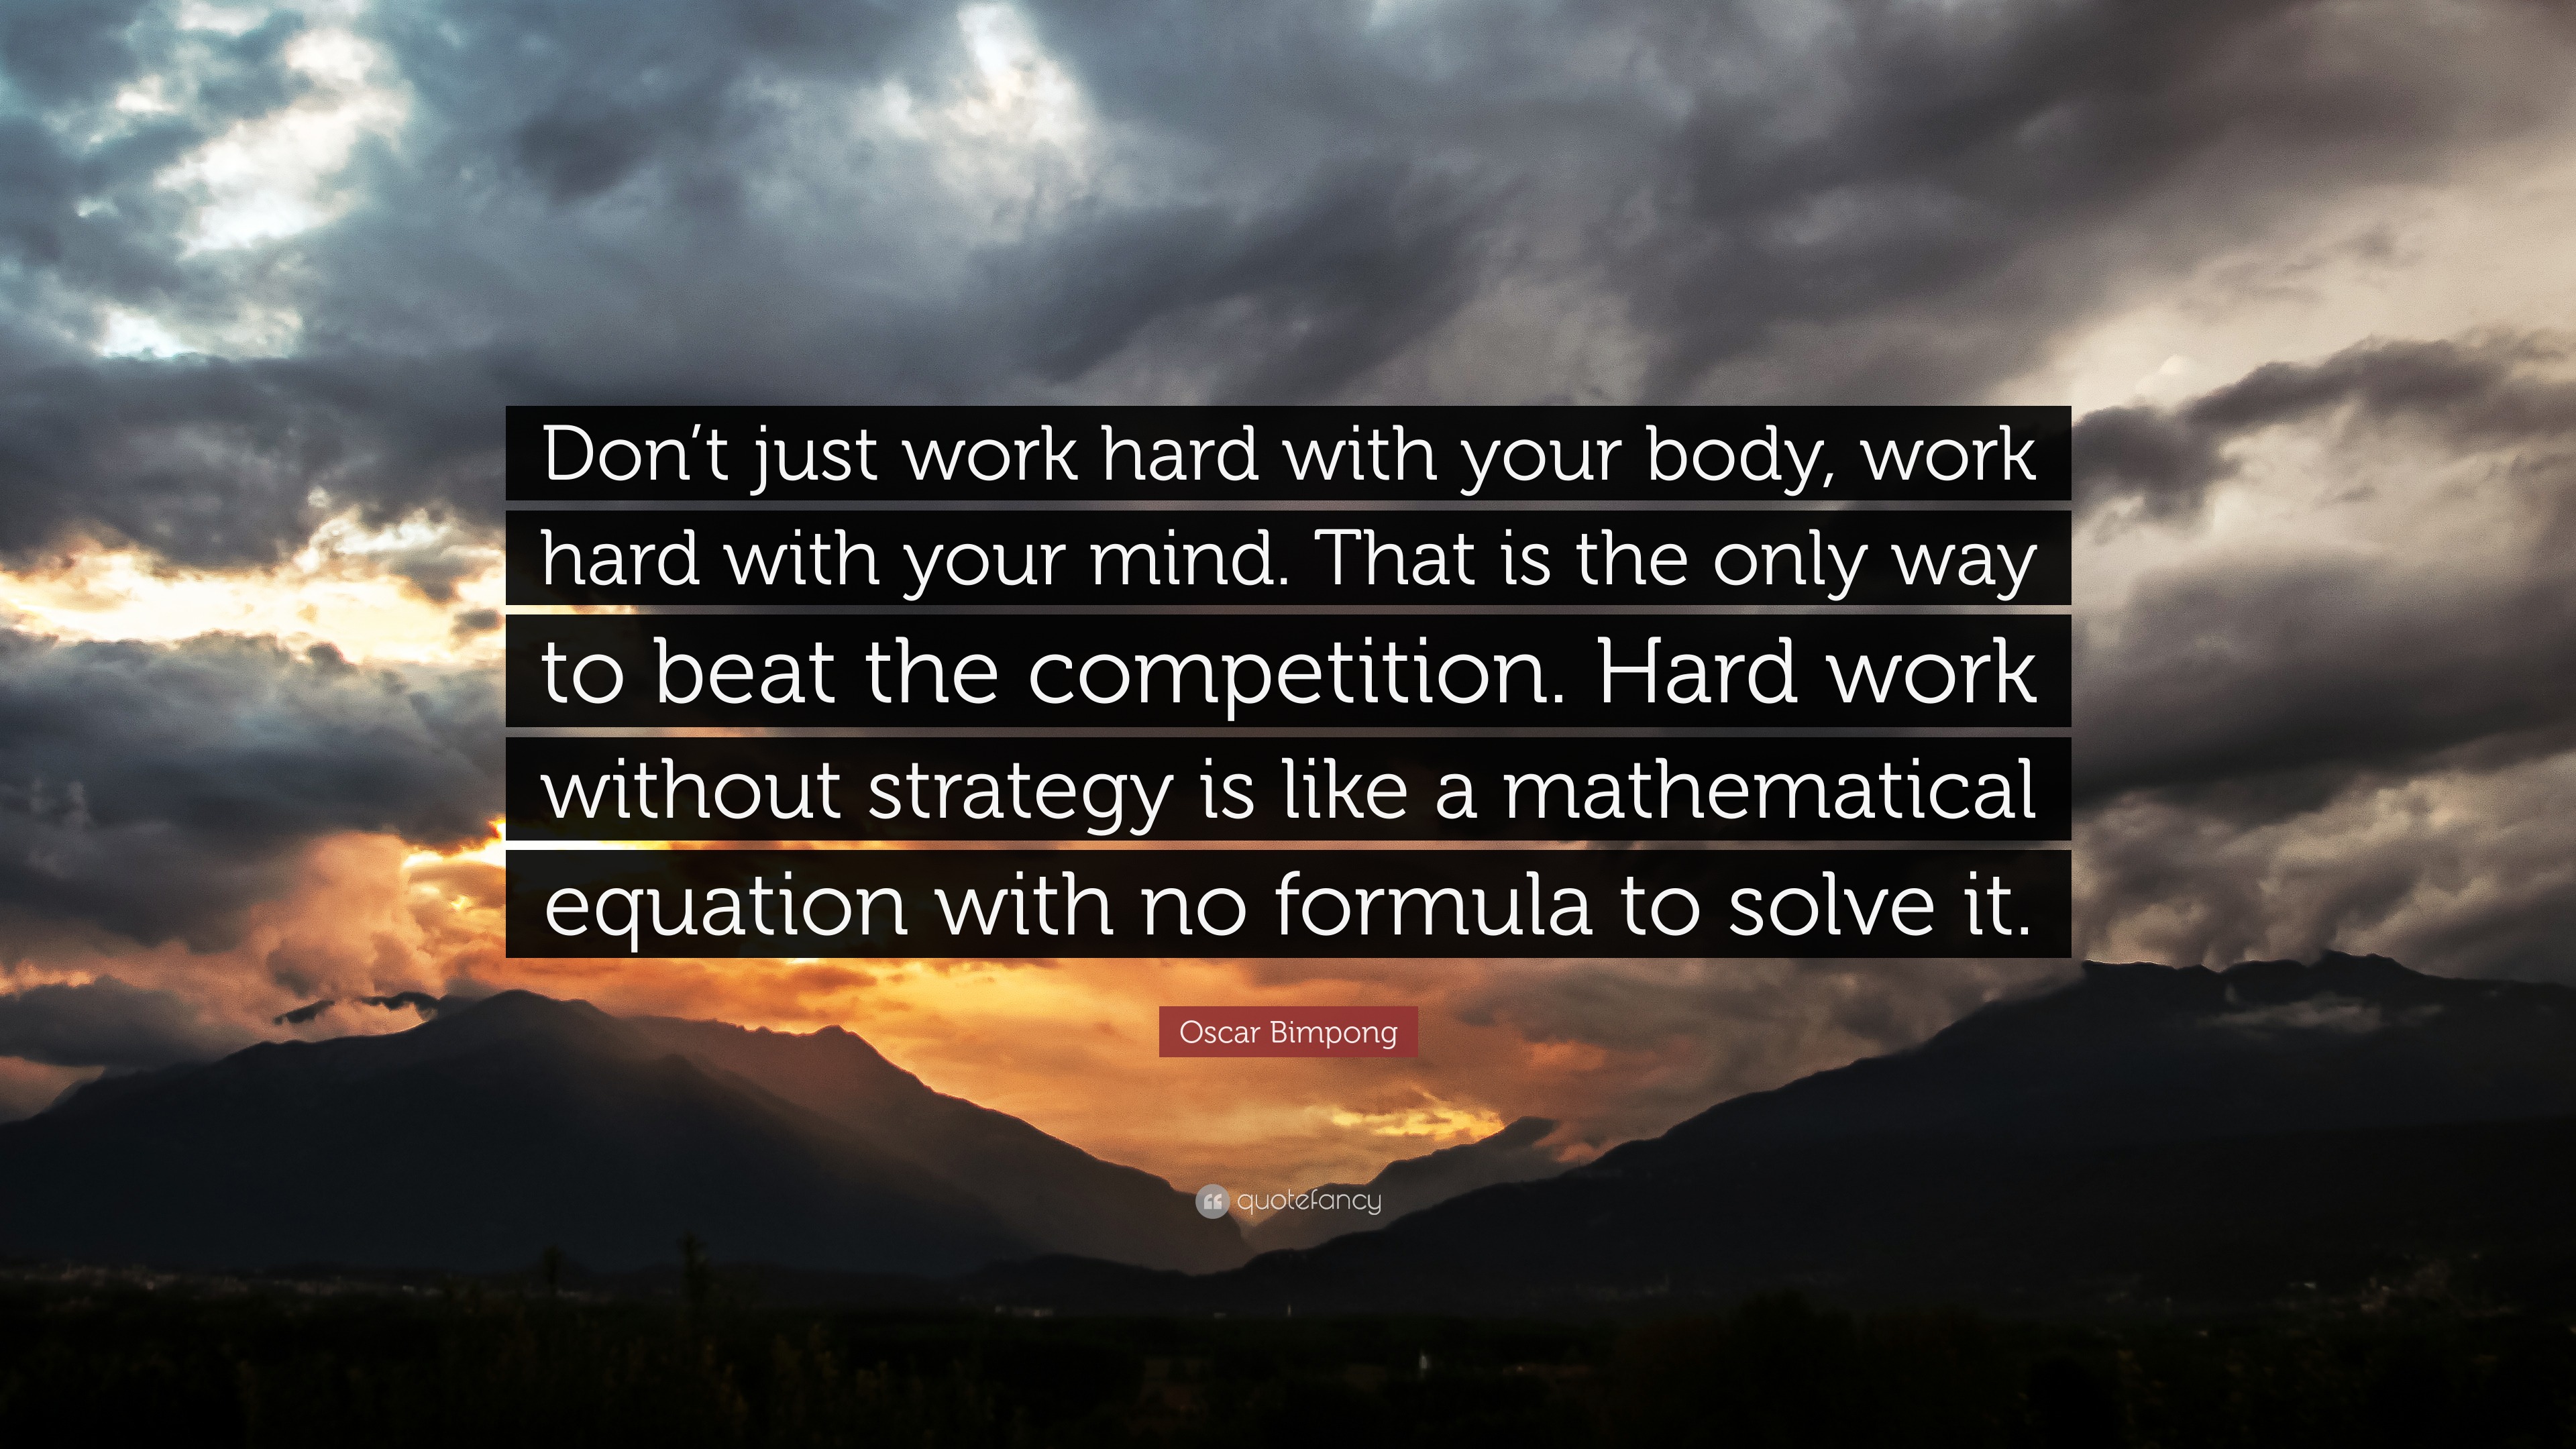 Oscar Bimpong Quote: “Don't just work hard with your body, hard with your is the only way to beat the competition. work w...”